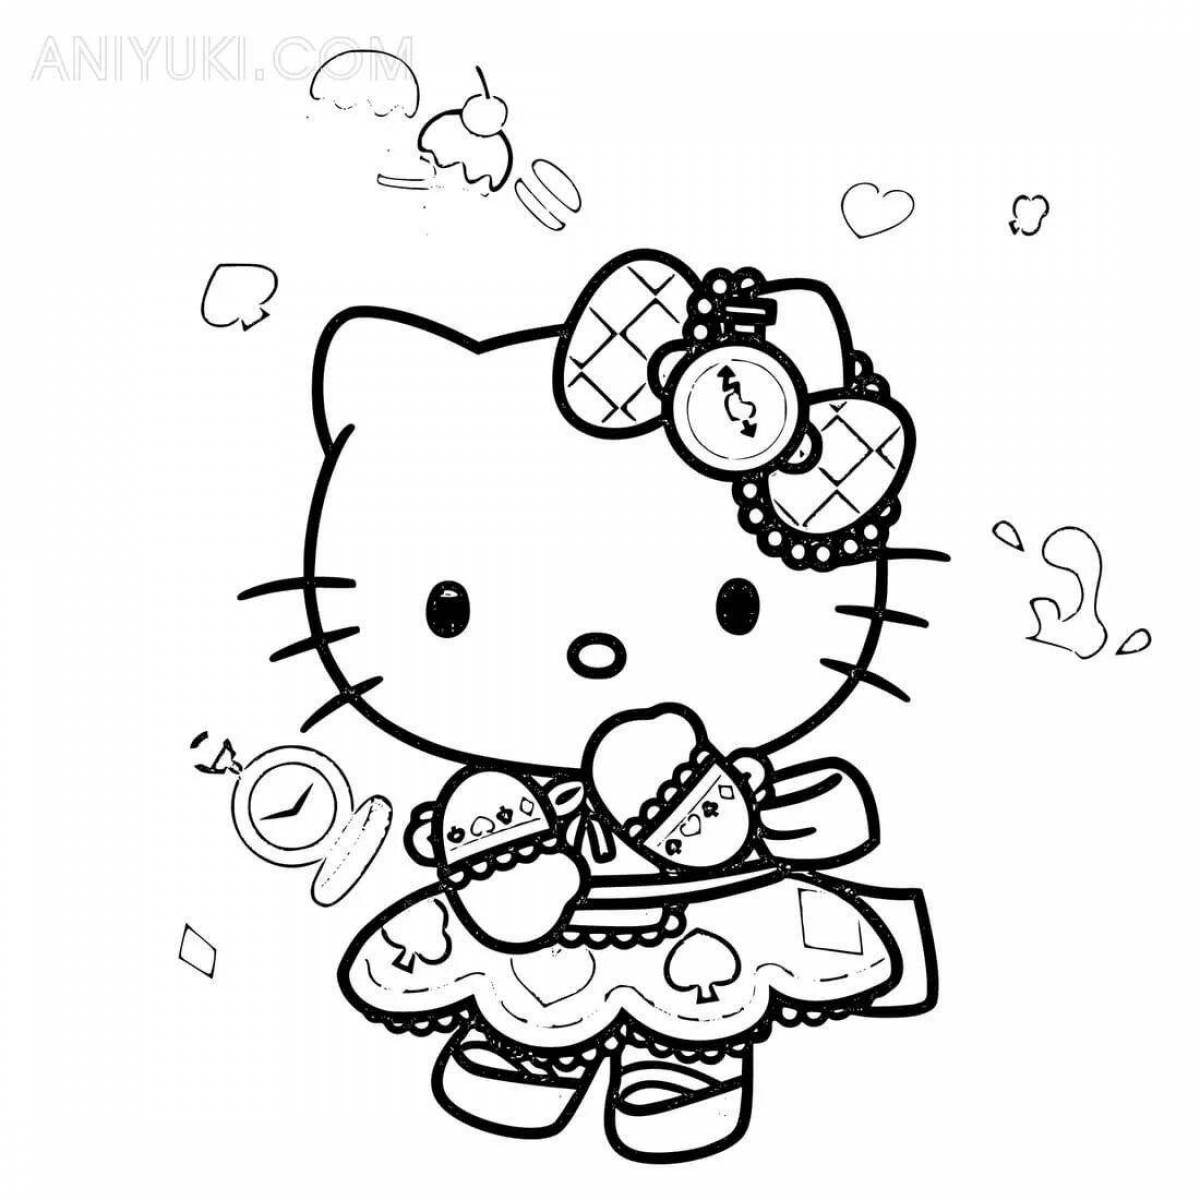 Funny hello kitty with a gun